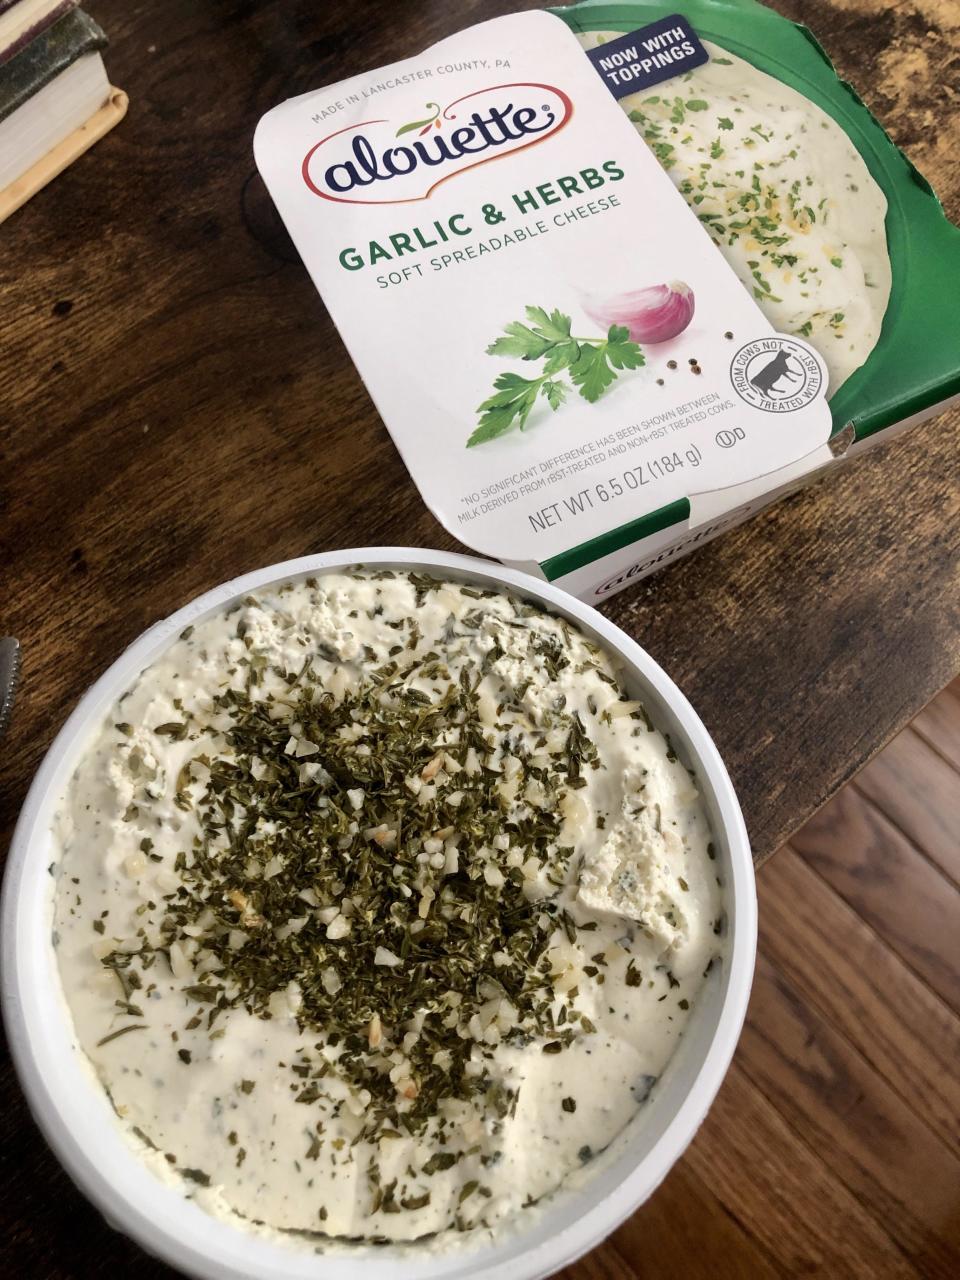 A bowl of garlic herb spreadable cheese topped with dried herbs